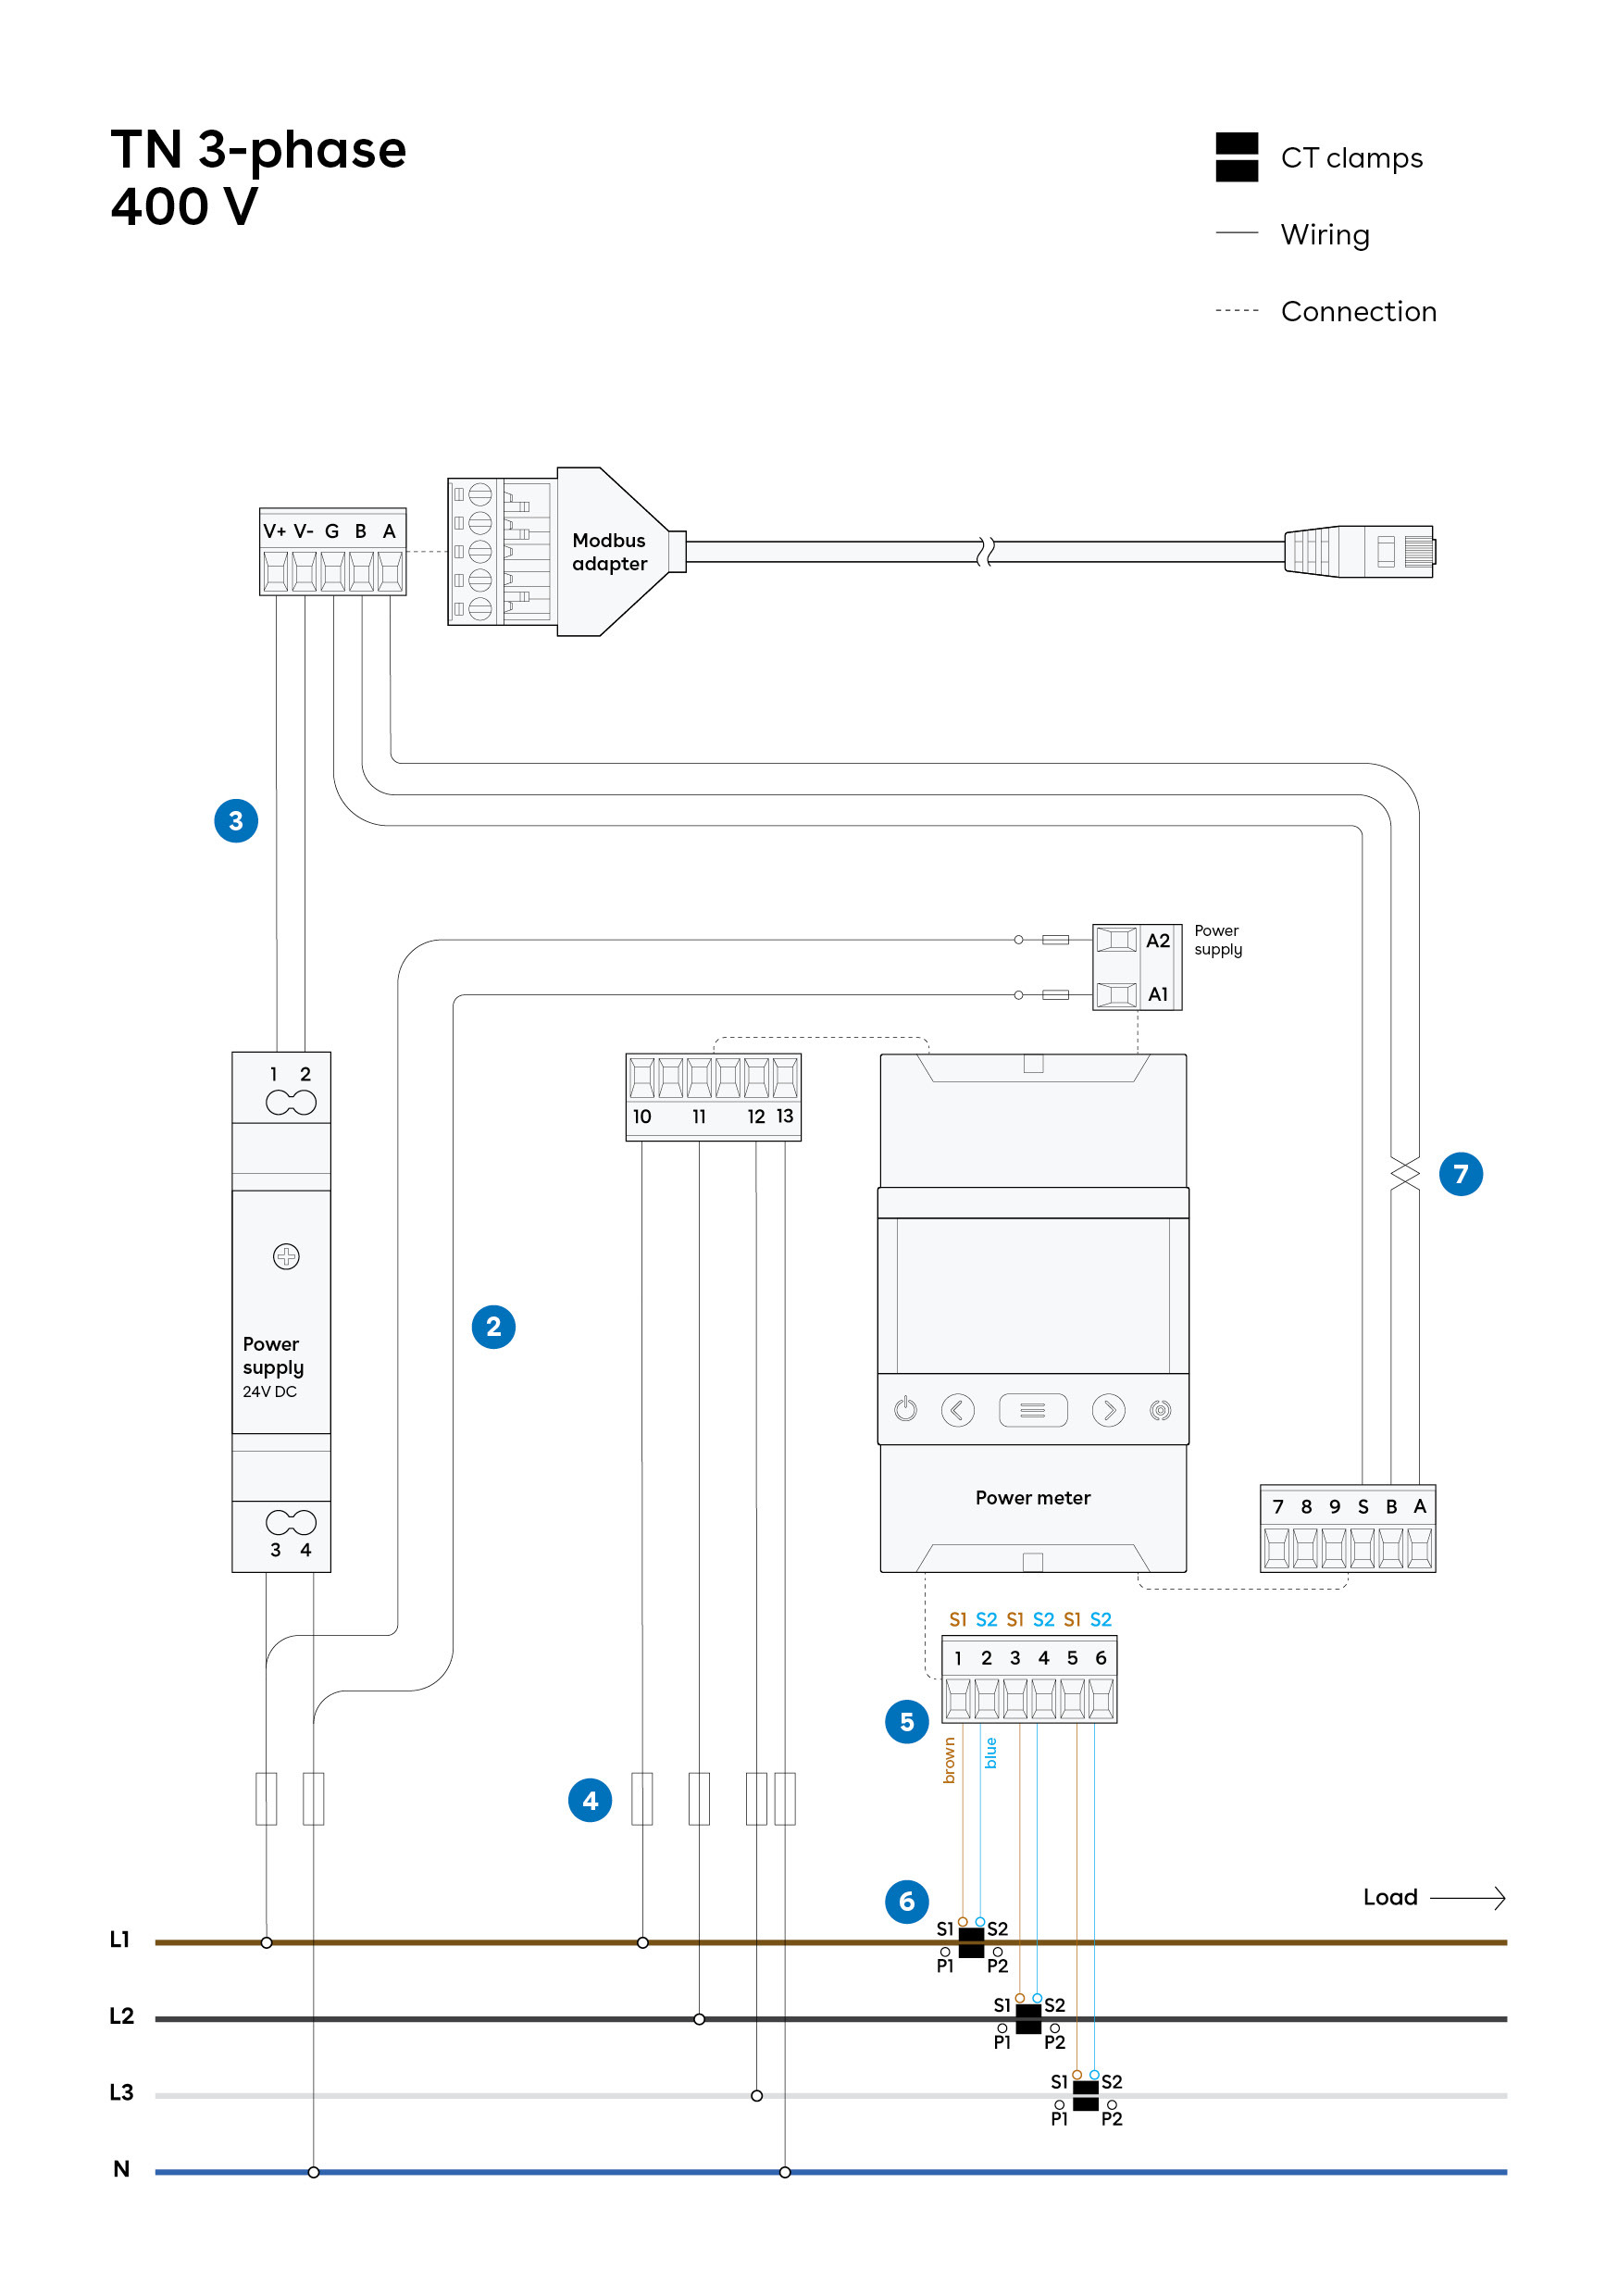 Easee 3-phase 400 volt schematic using CT clamps